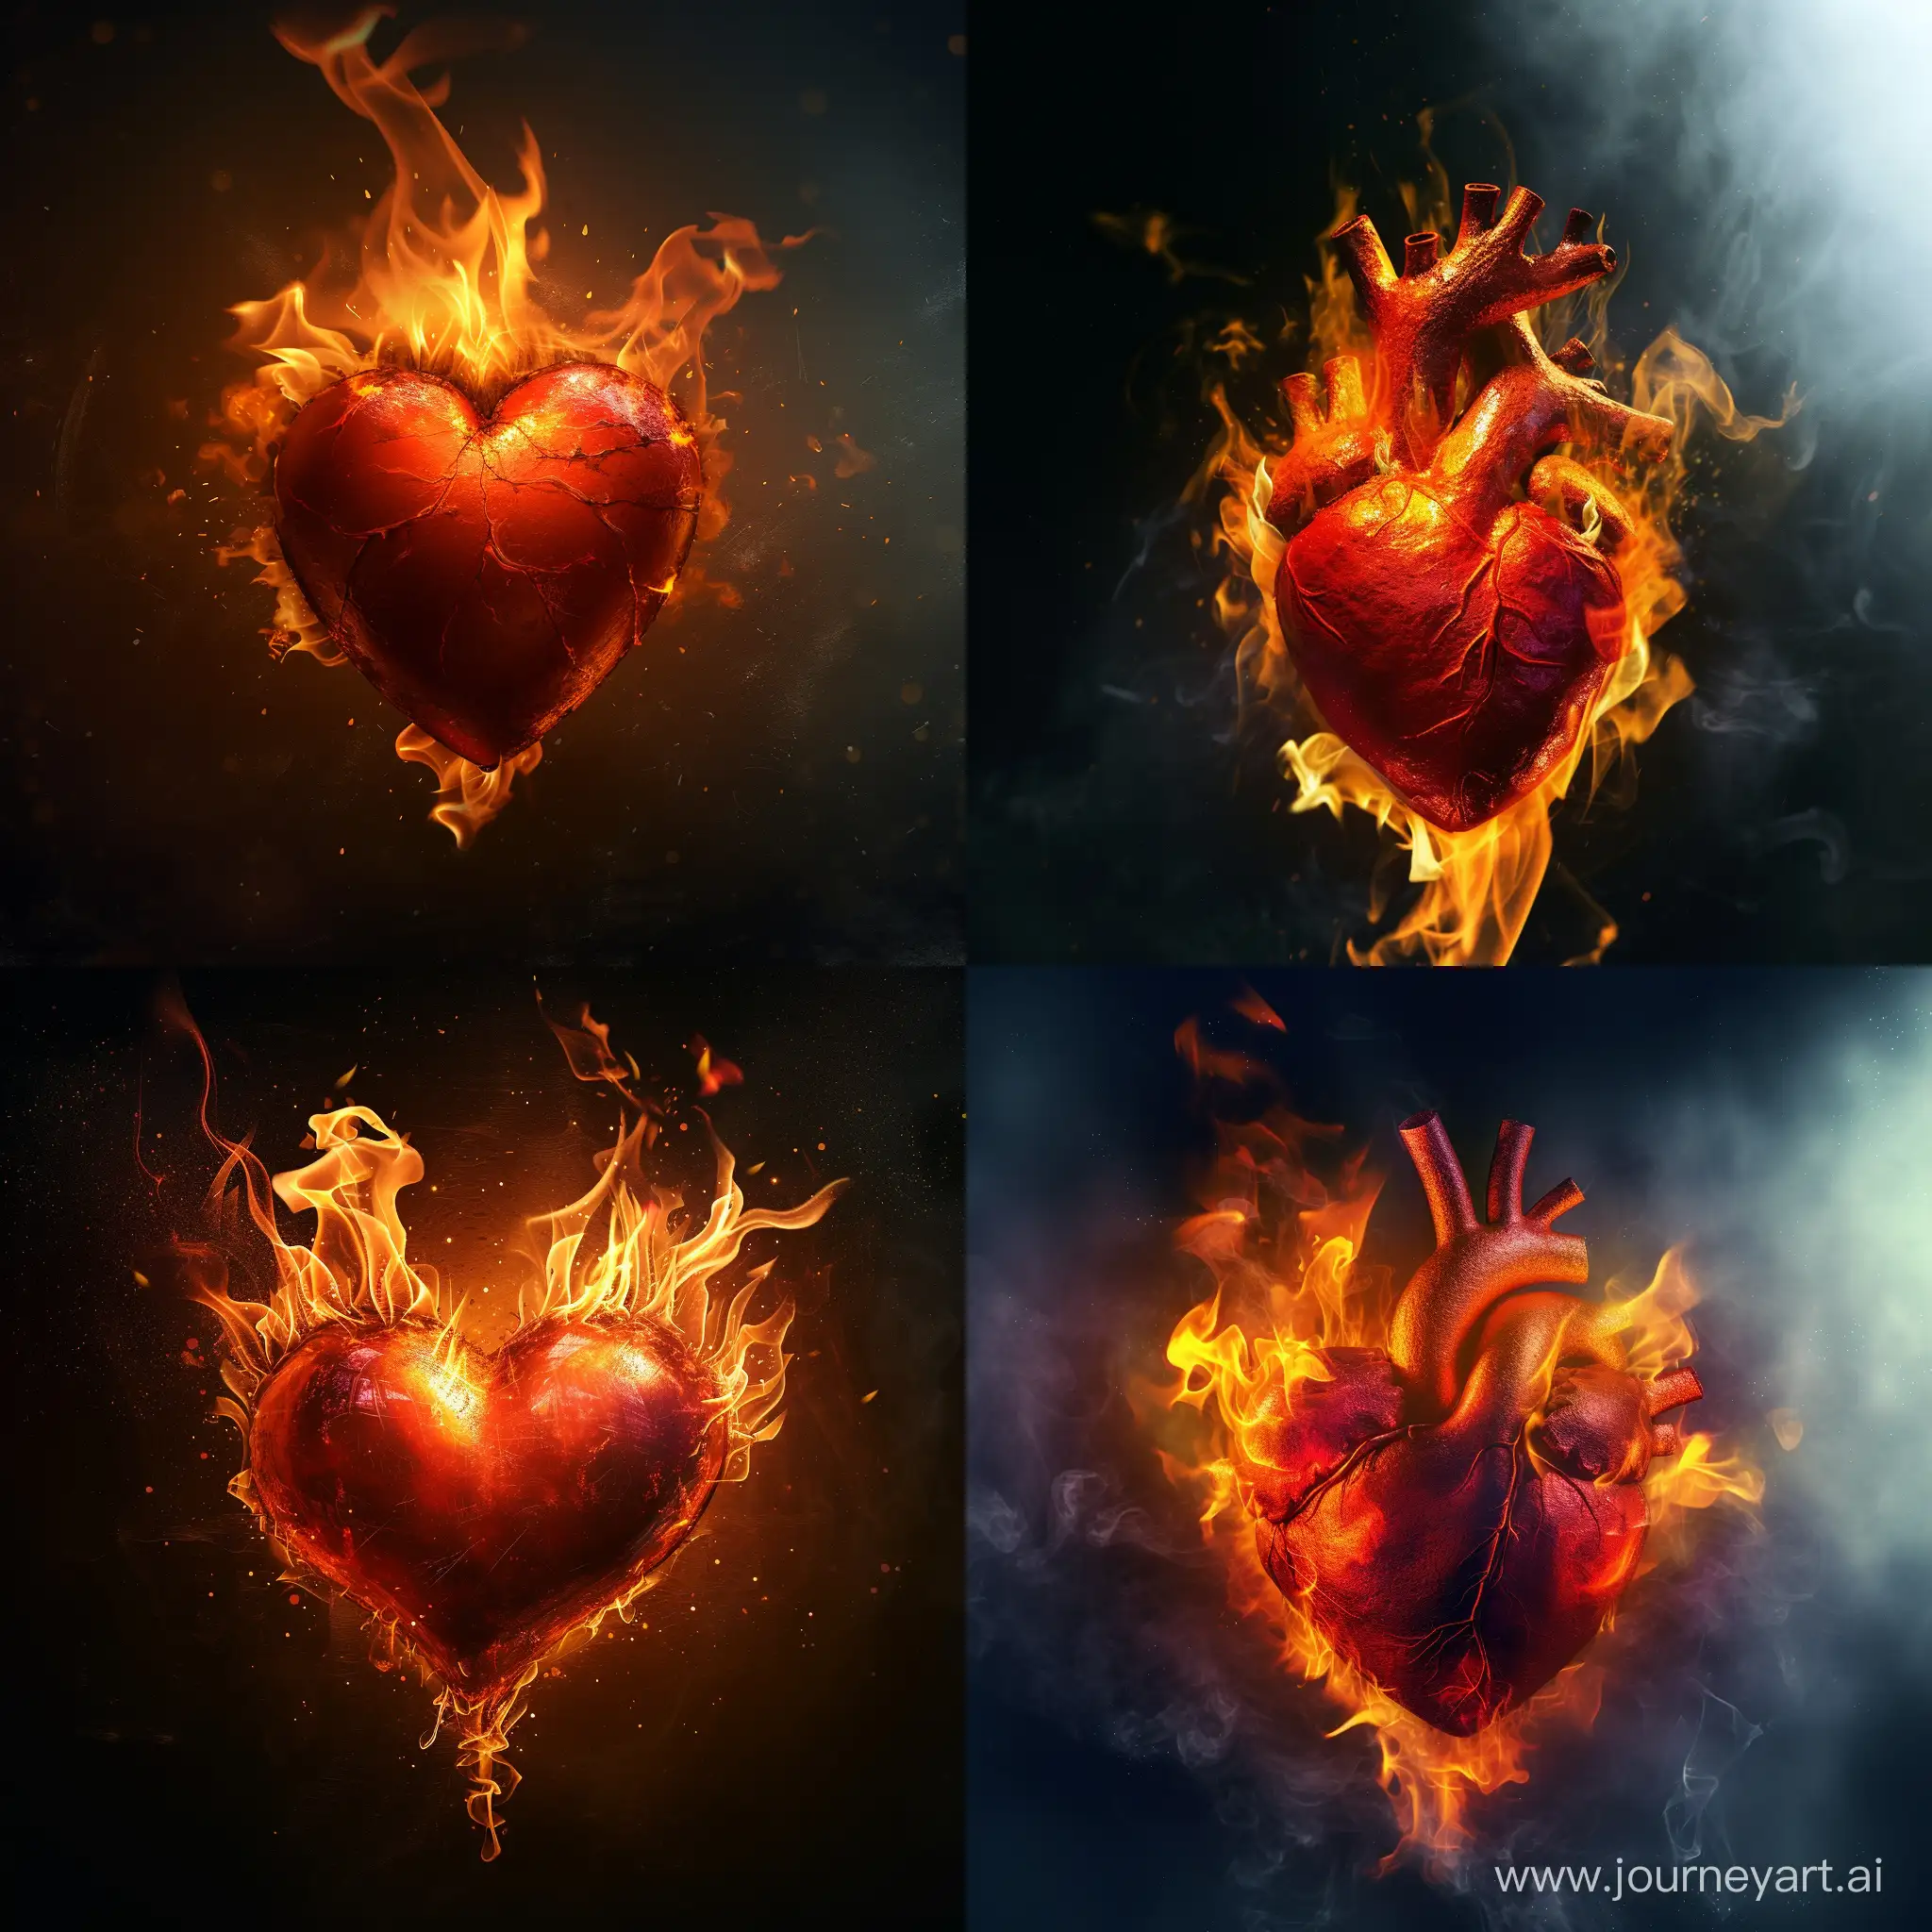 Fiery-Passion-Red-Heart-Burning-in-Intense-Flames